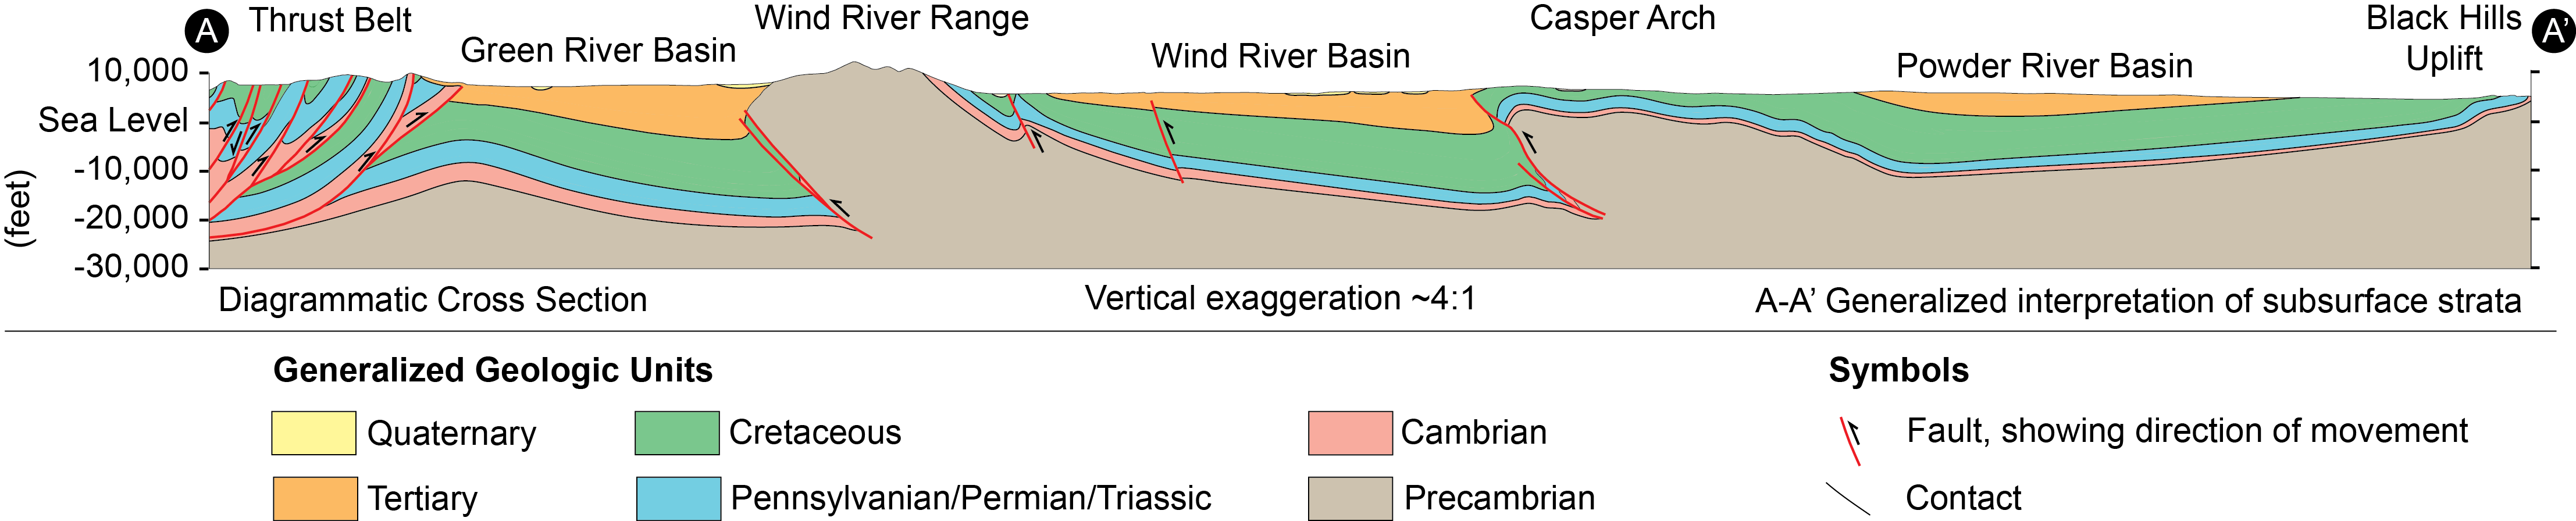 Generalized Wyoming cross section